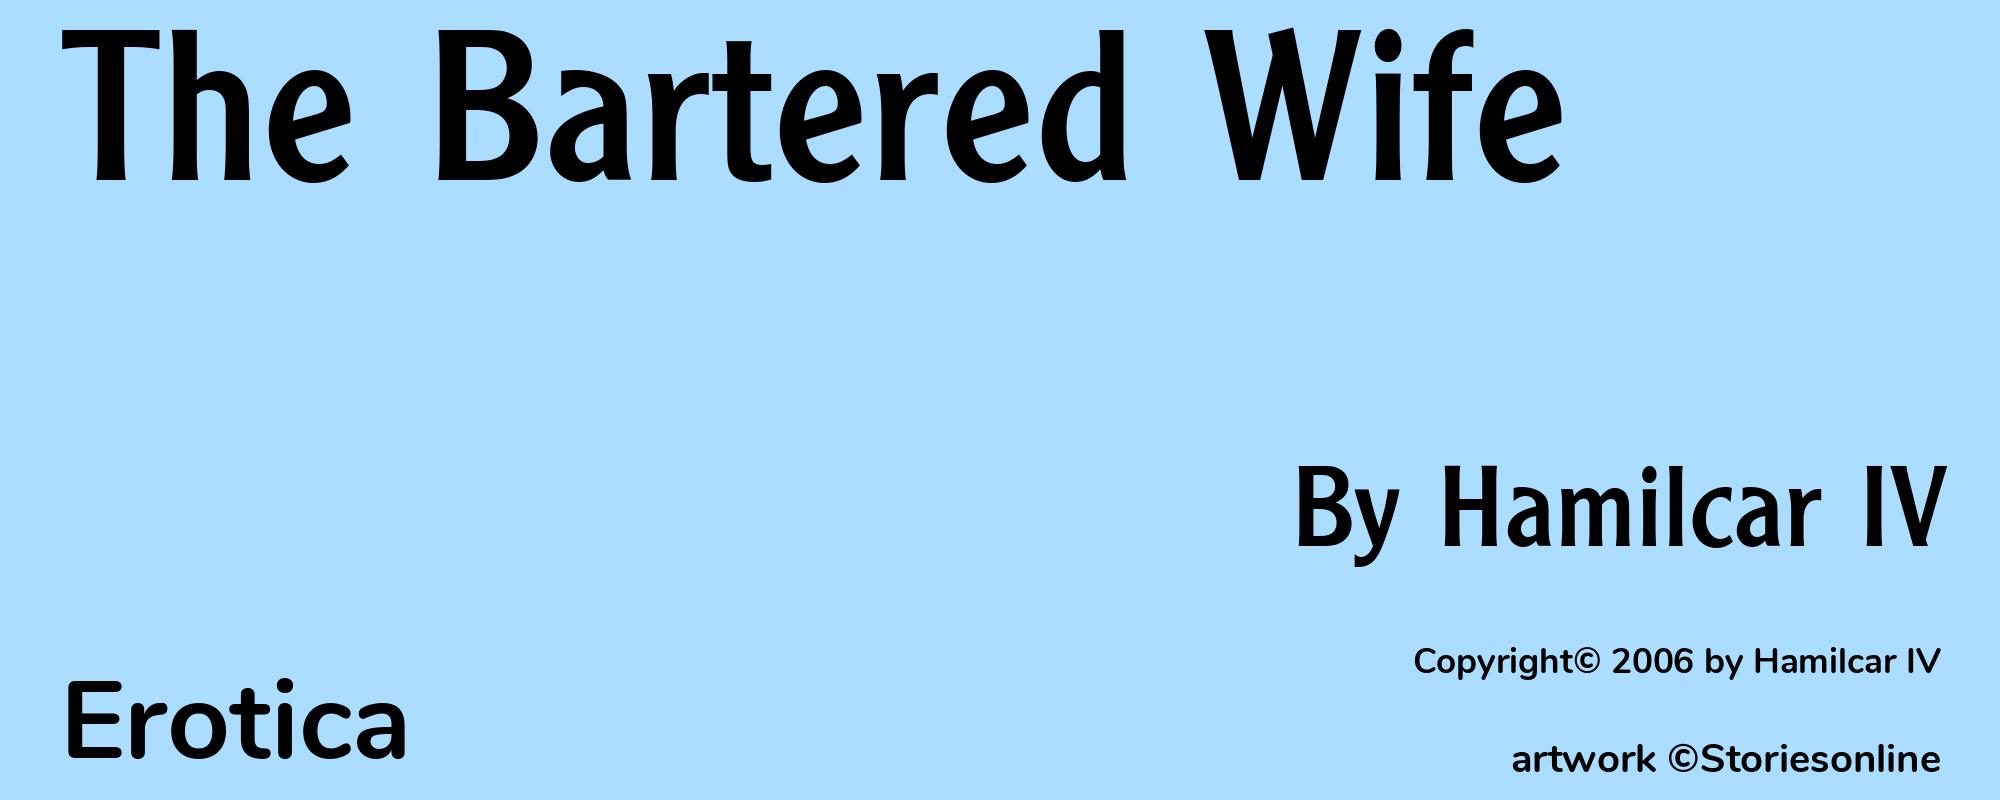 The Bartered Wife - Cover